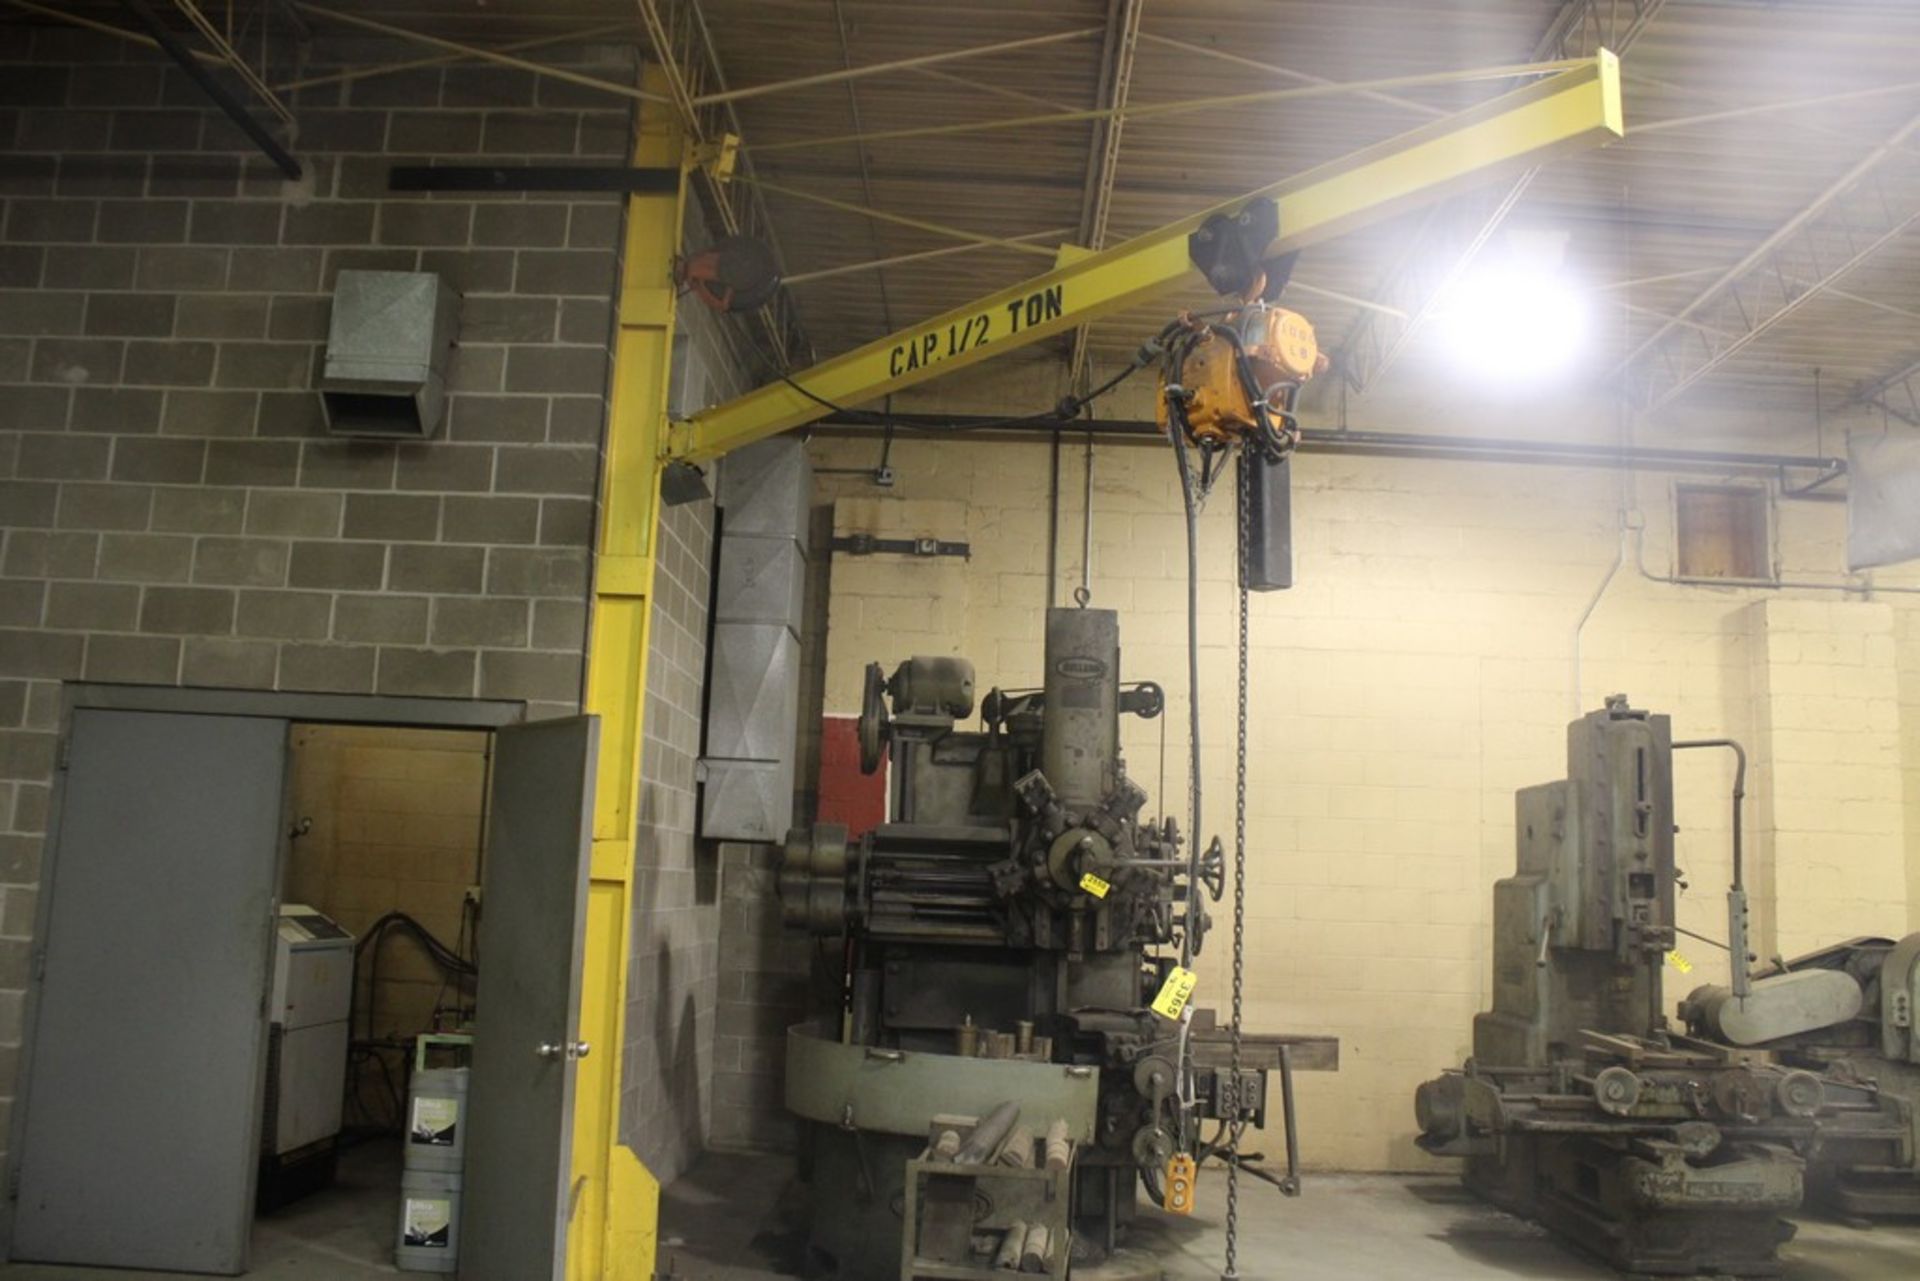 12' 1/2 TON JIB CRANE WITH INGERSOLL RAND 1/2 TON ELECTRIC HOIST WITH PENDANT